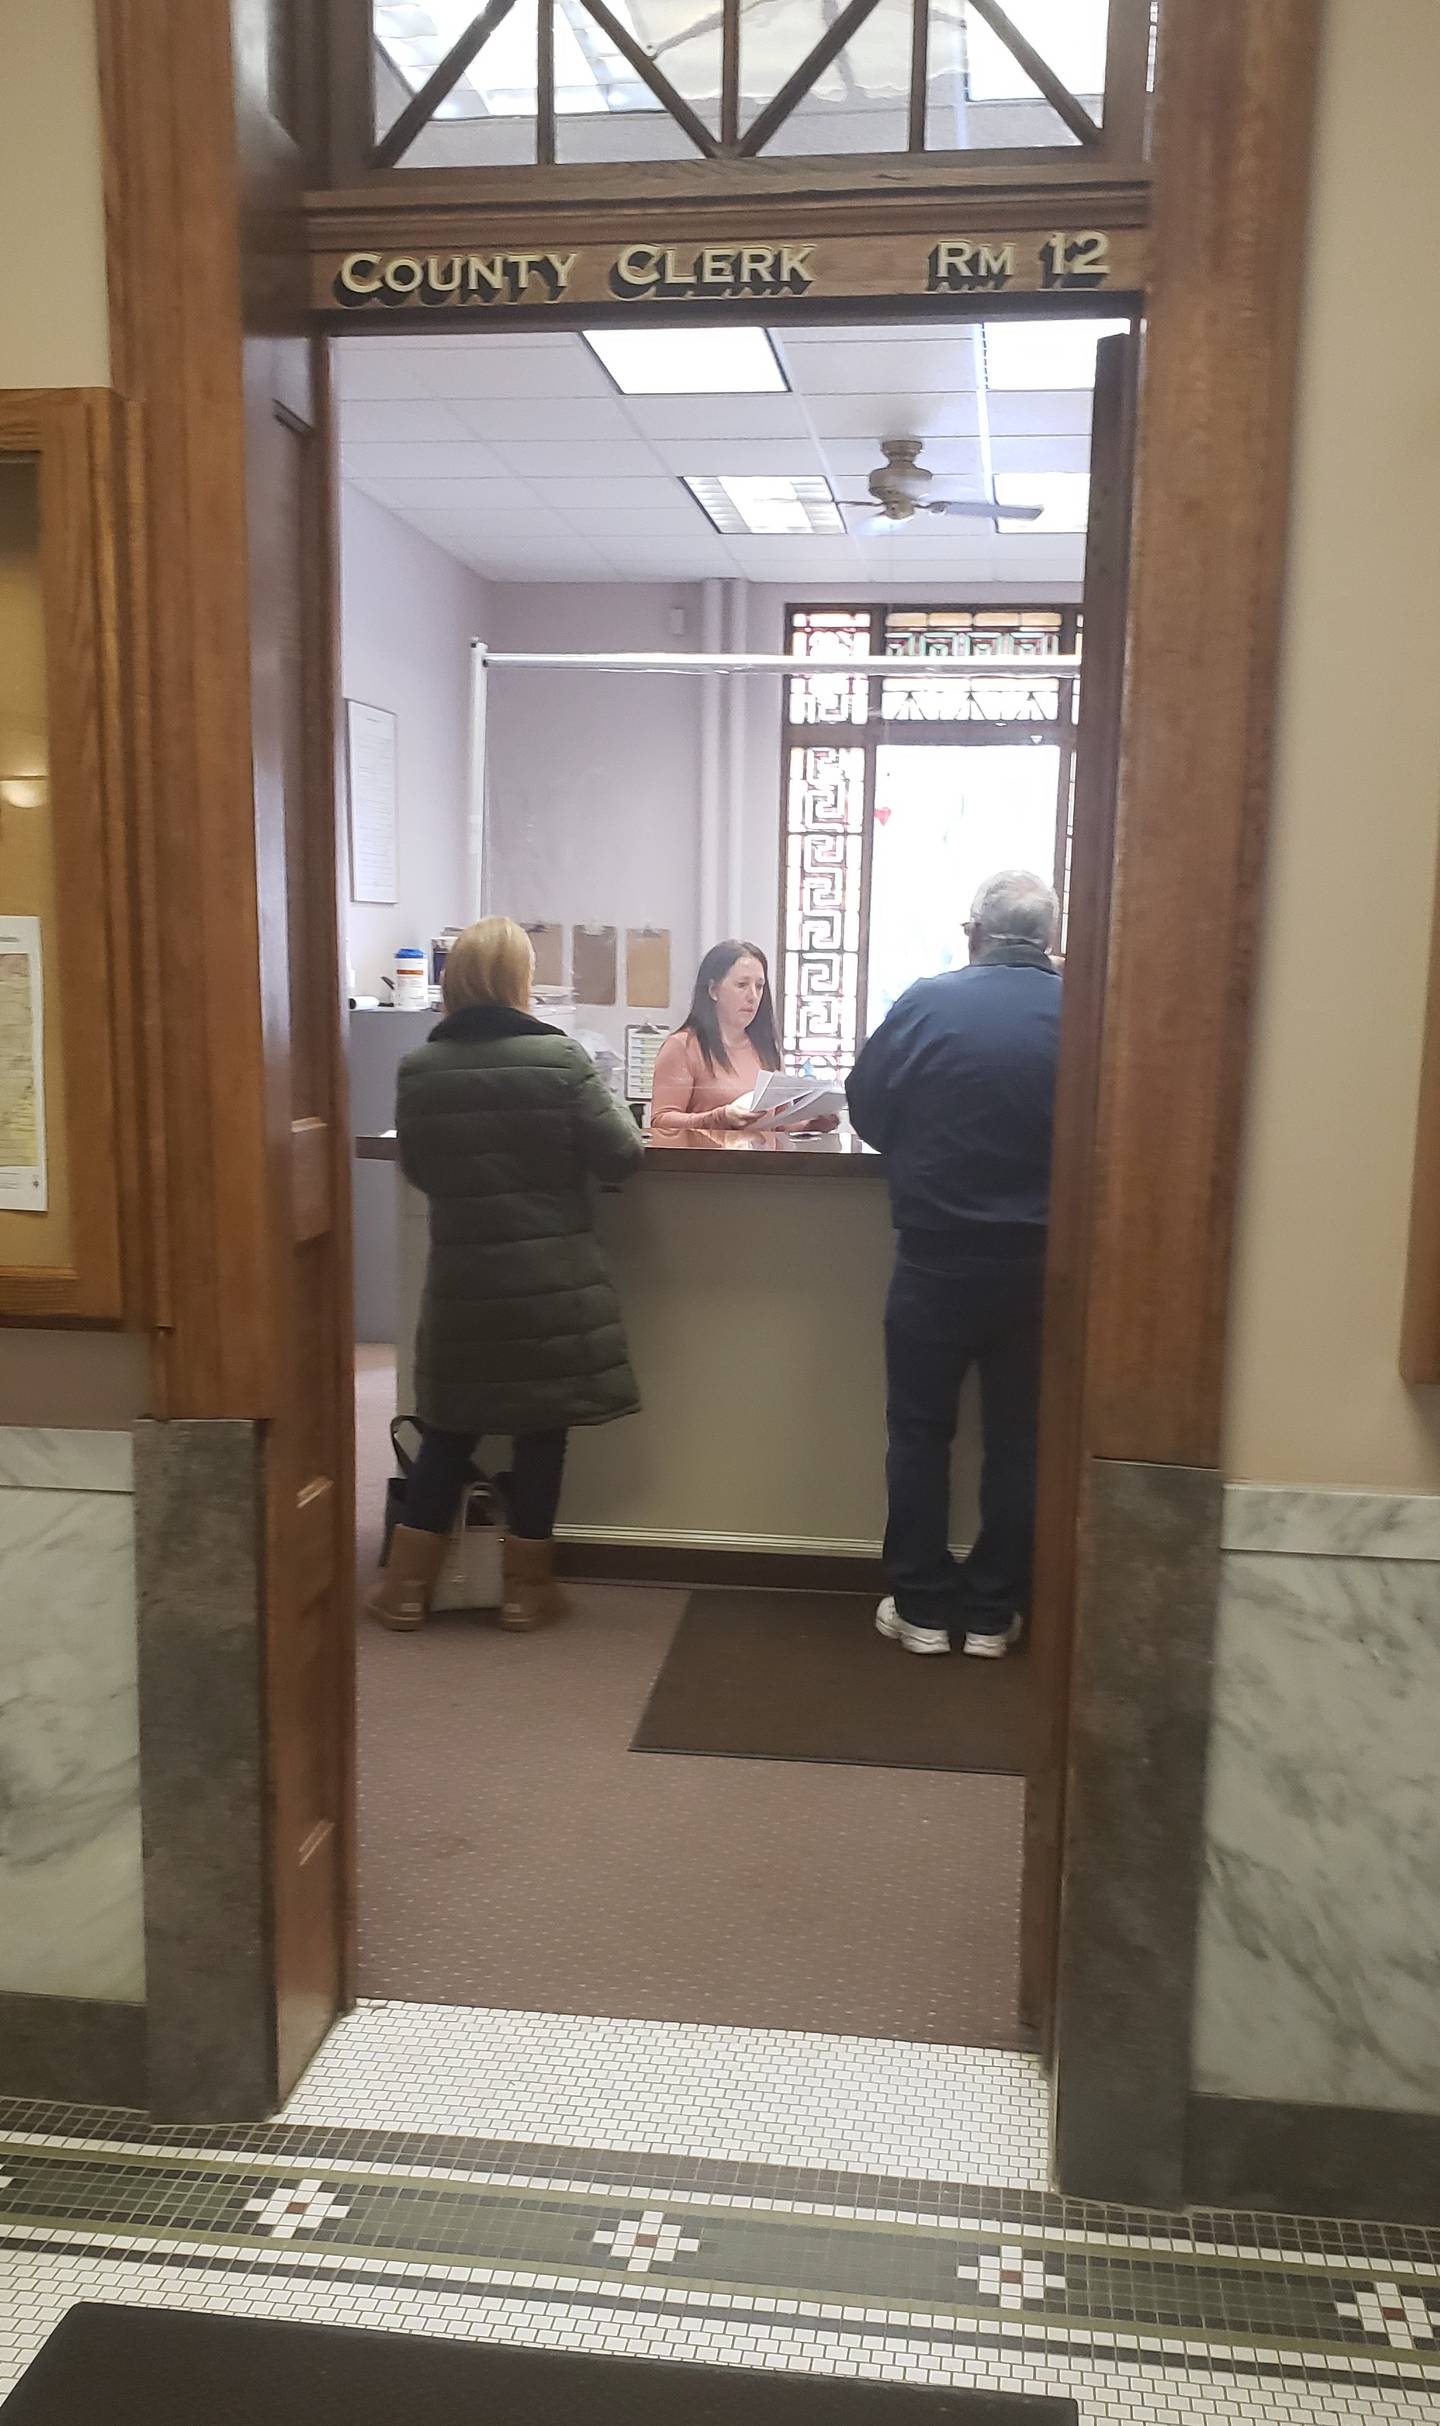 Monday marked the first day that candidates for Grundy County offices could submit their petitions to get on the ballot for the June 28 primary election.